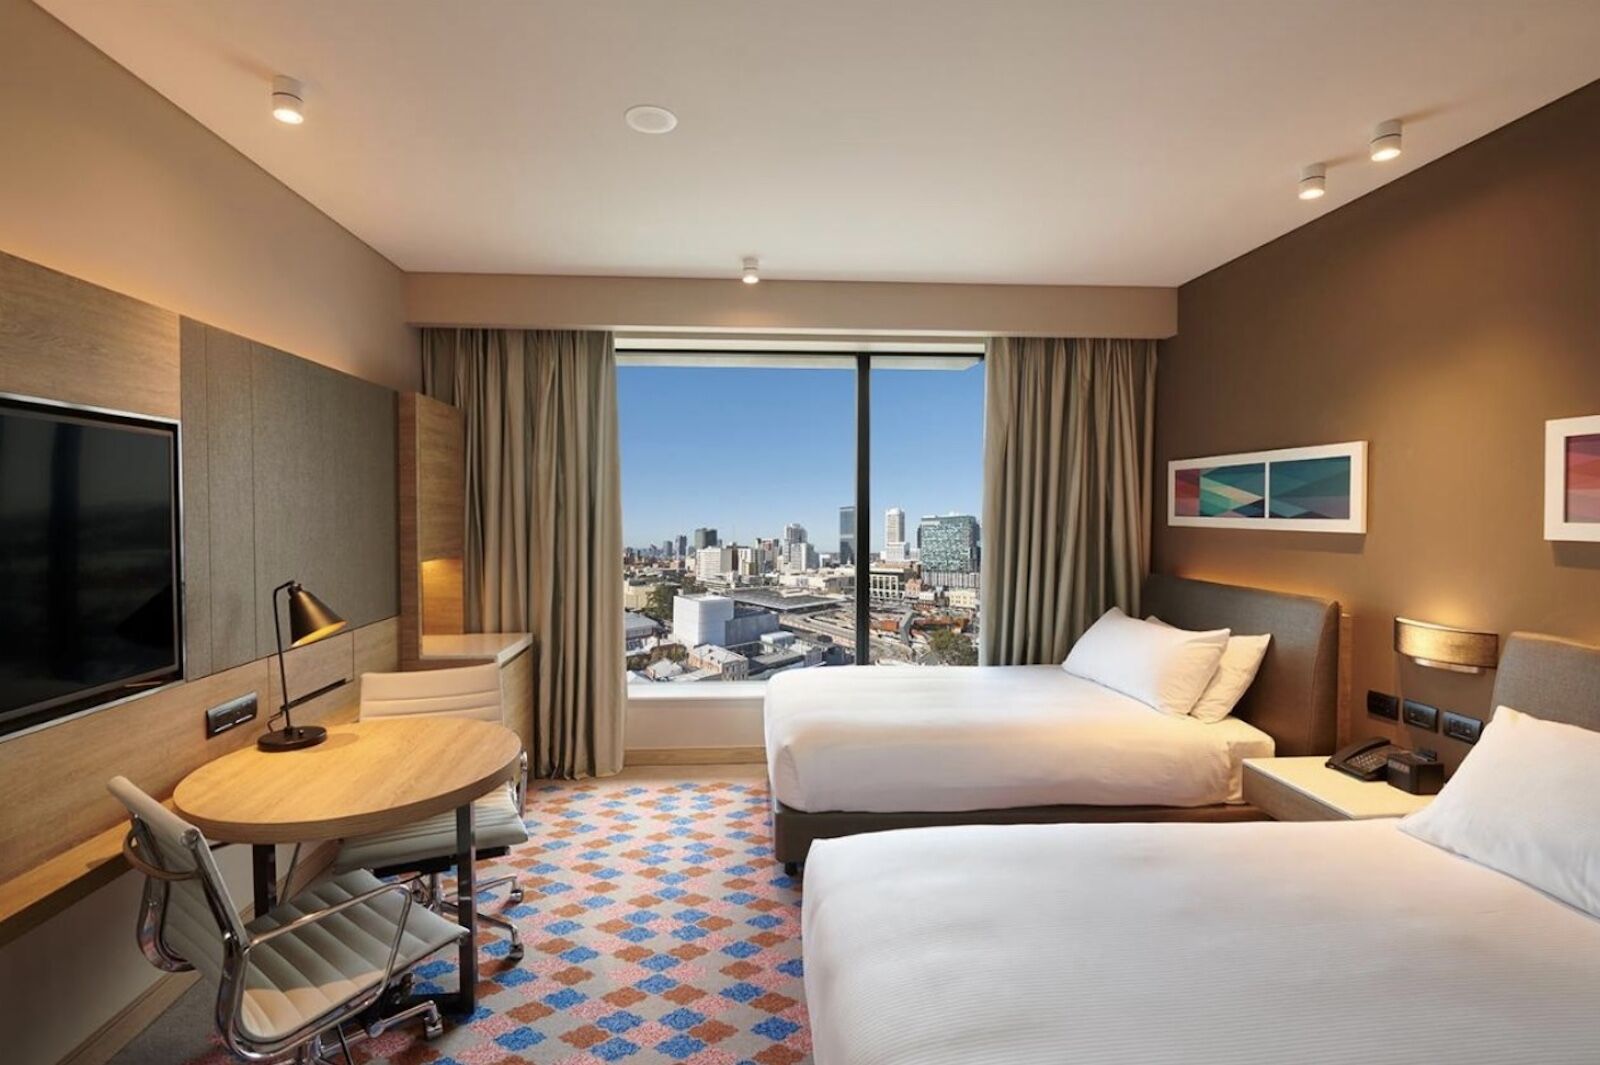 best parks in perth - doubletree perth bedroom